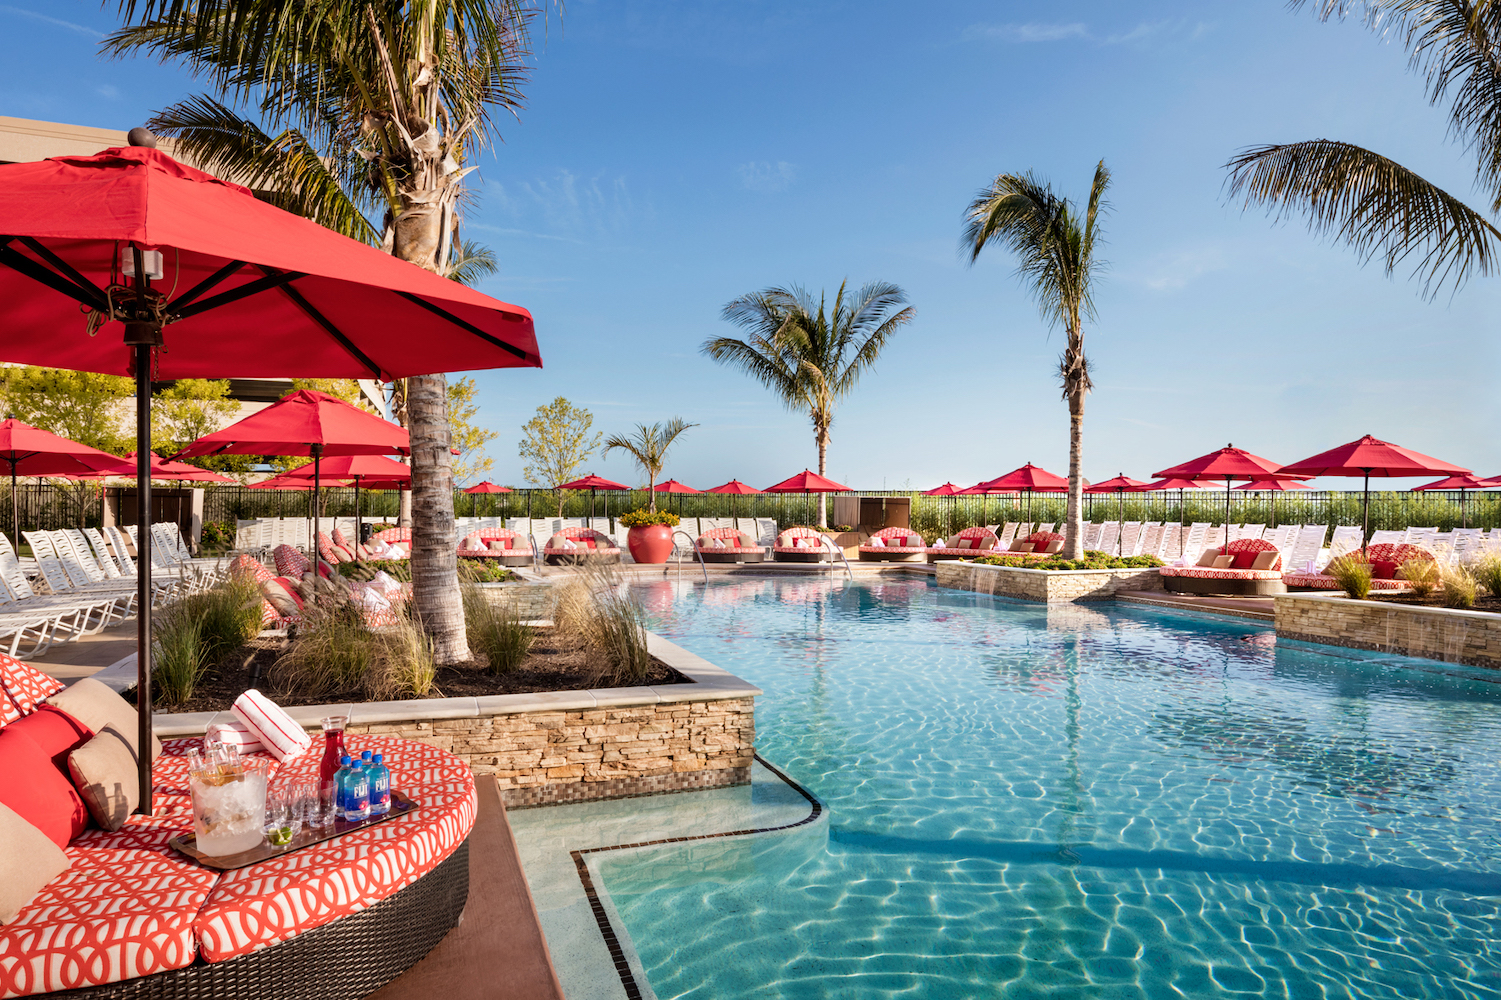 a blue pool surrounded by palm trees and red umbrellas